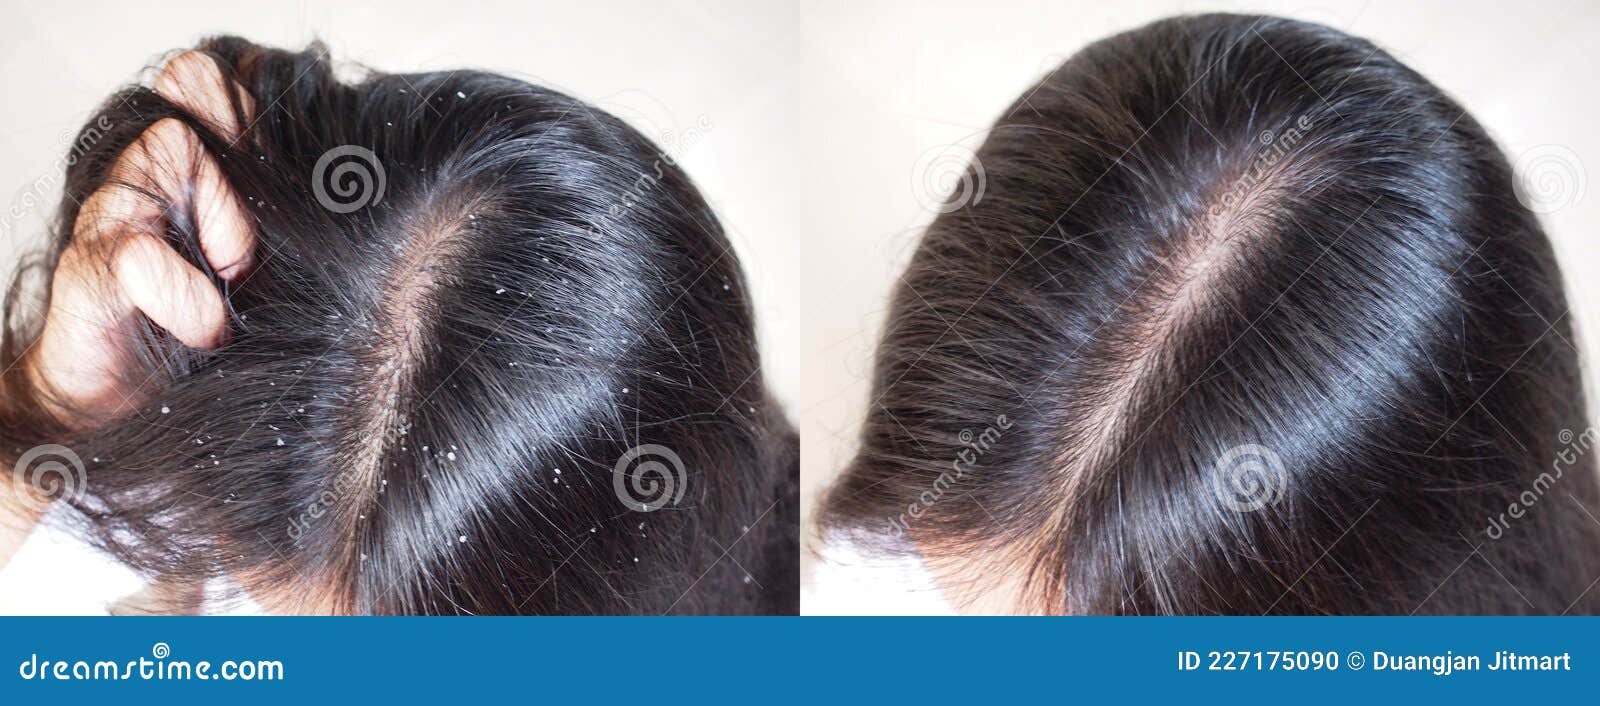 image before and after anti dandruff treatment .